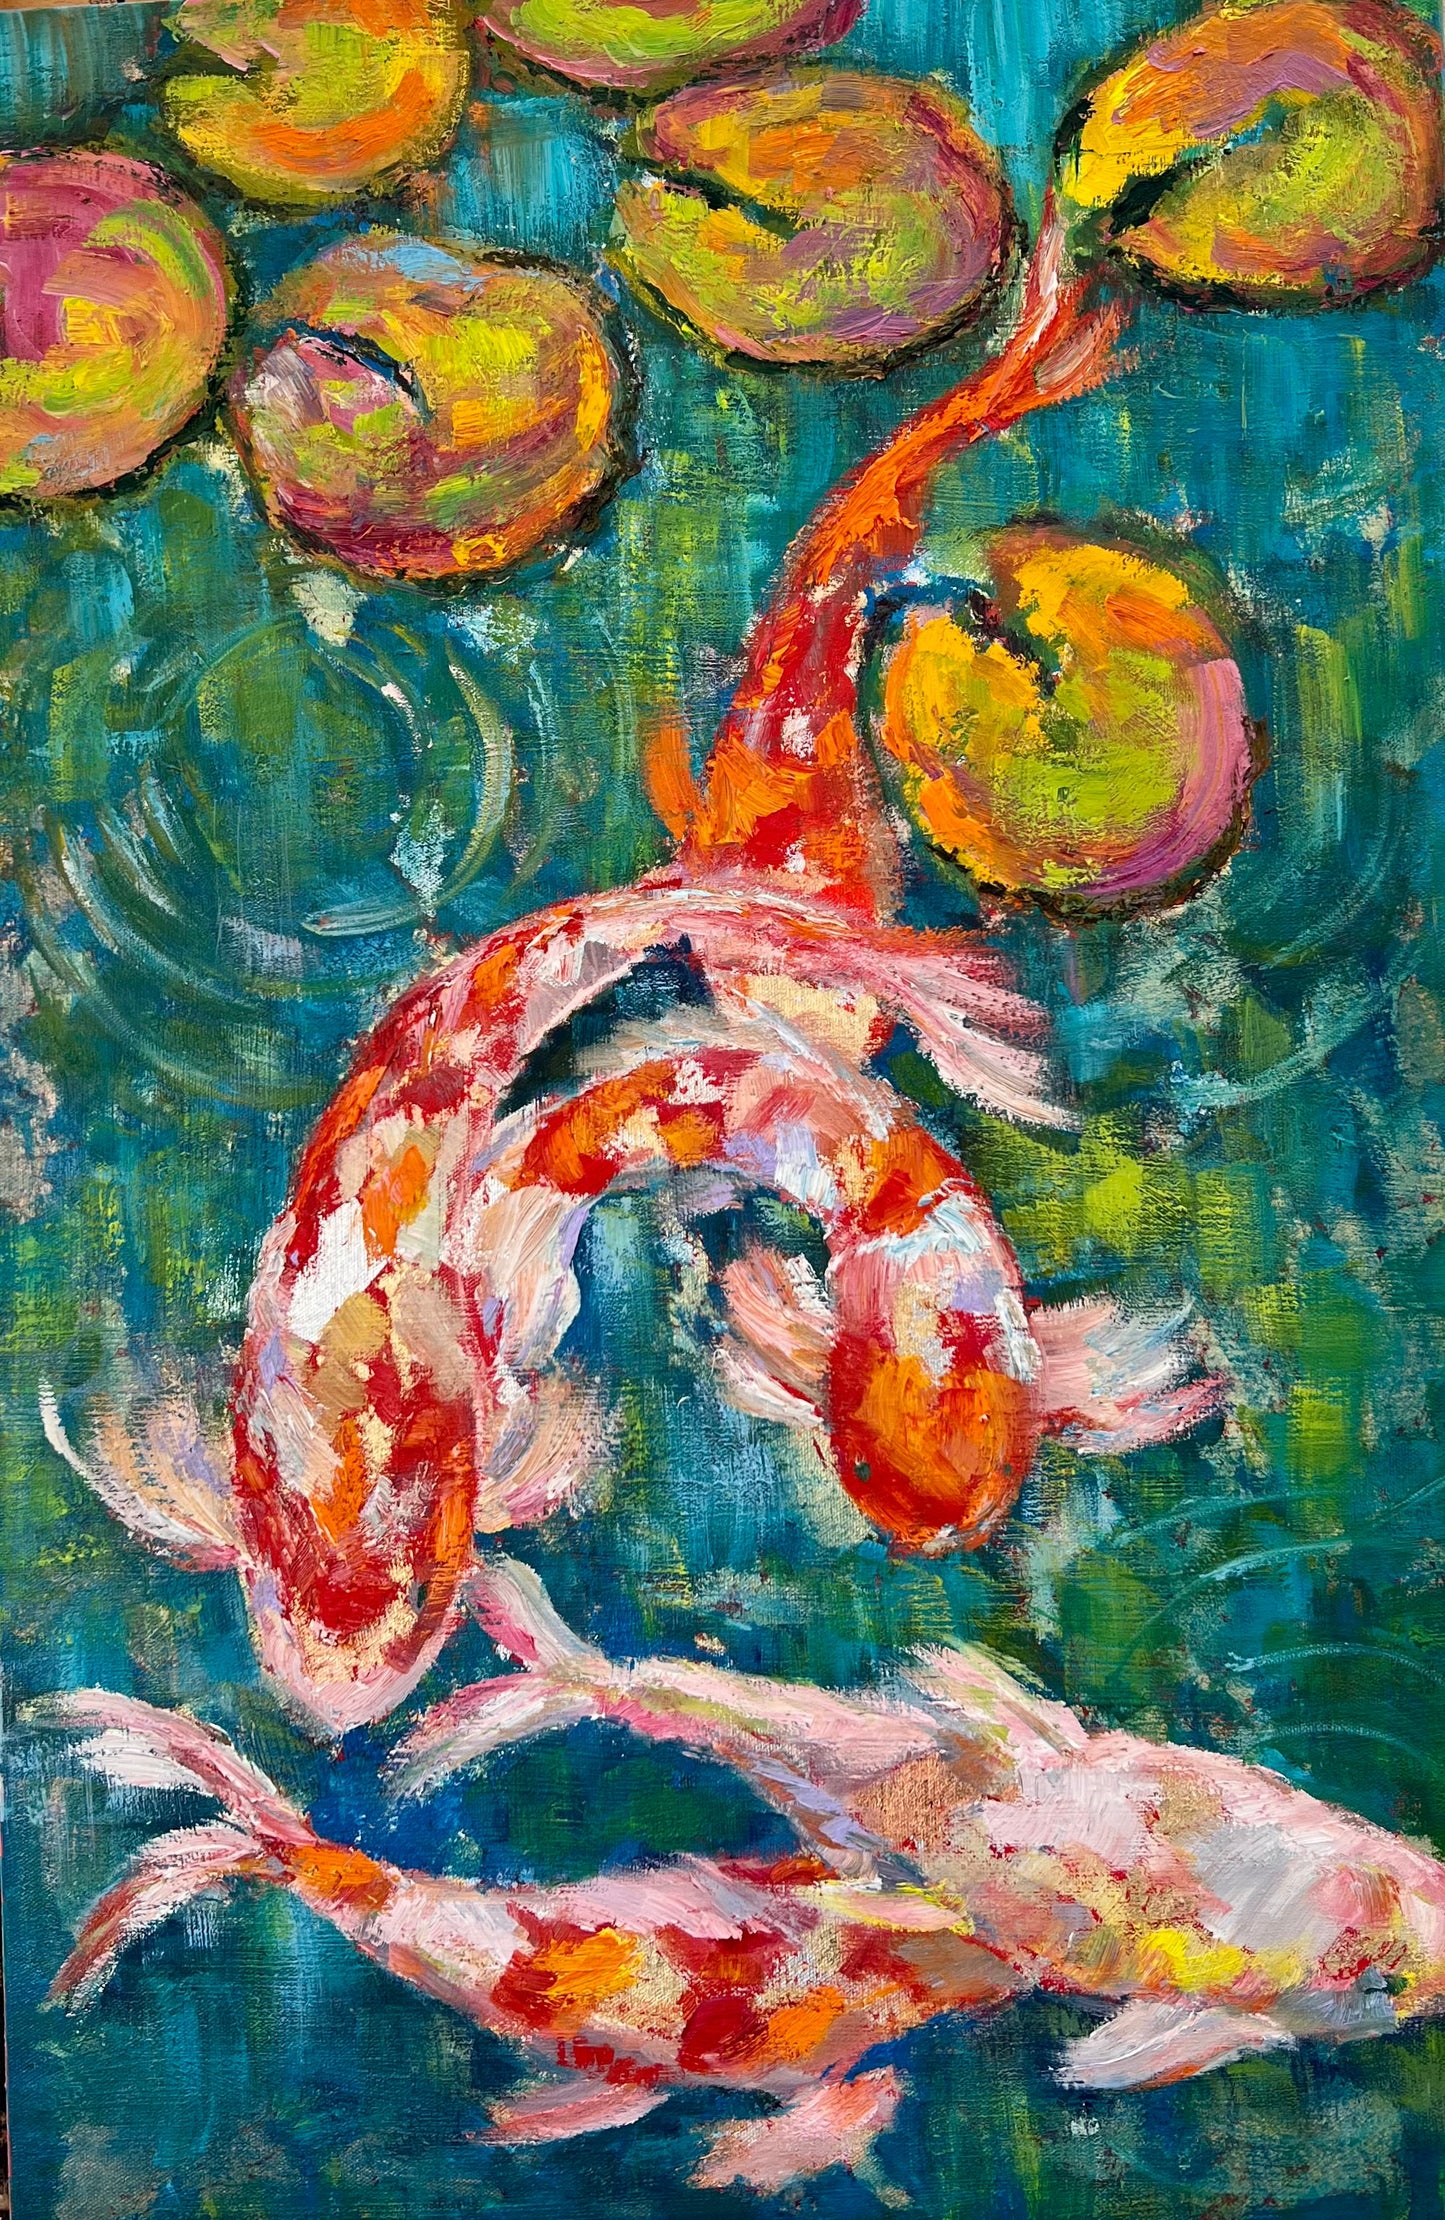 In a Peaceful Place, Ripples Fan out on A Lily Pond, Colourful Koi Play (ORIGINAL SOLD)